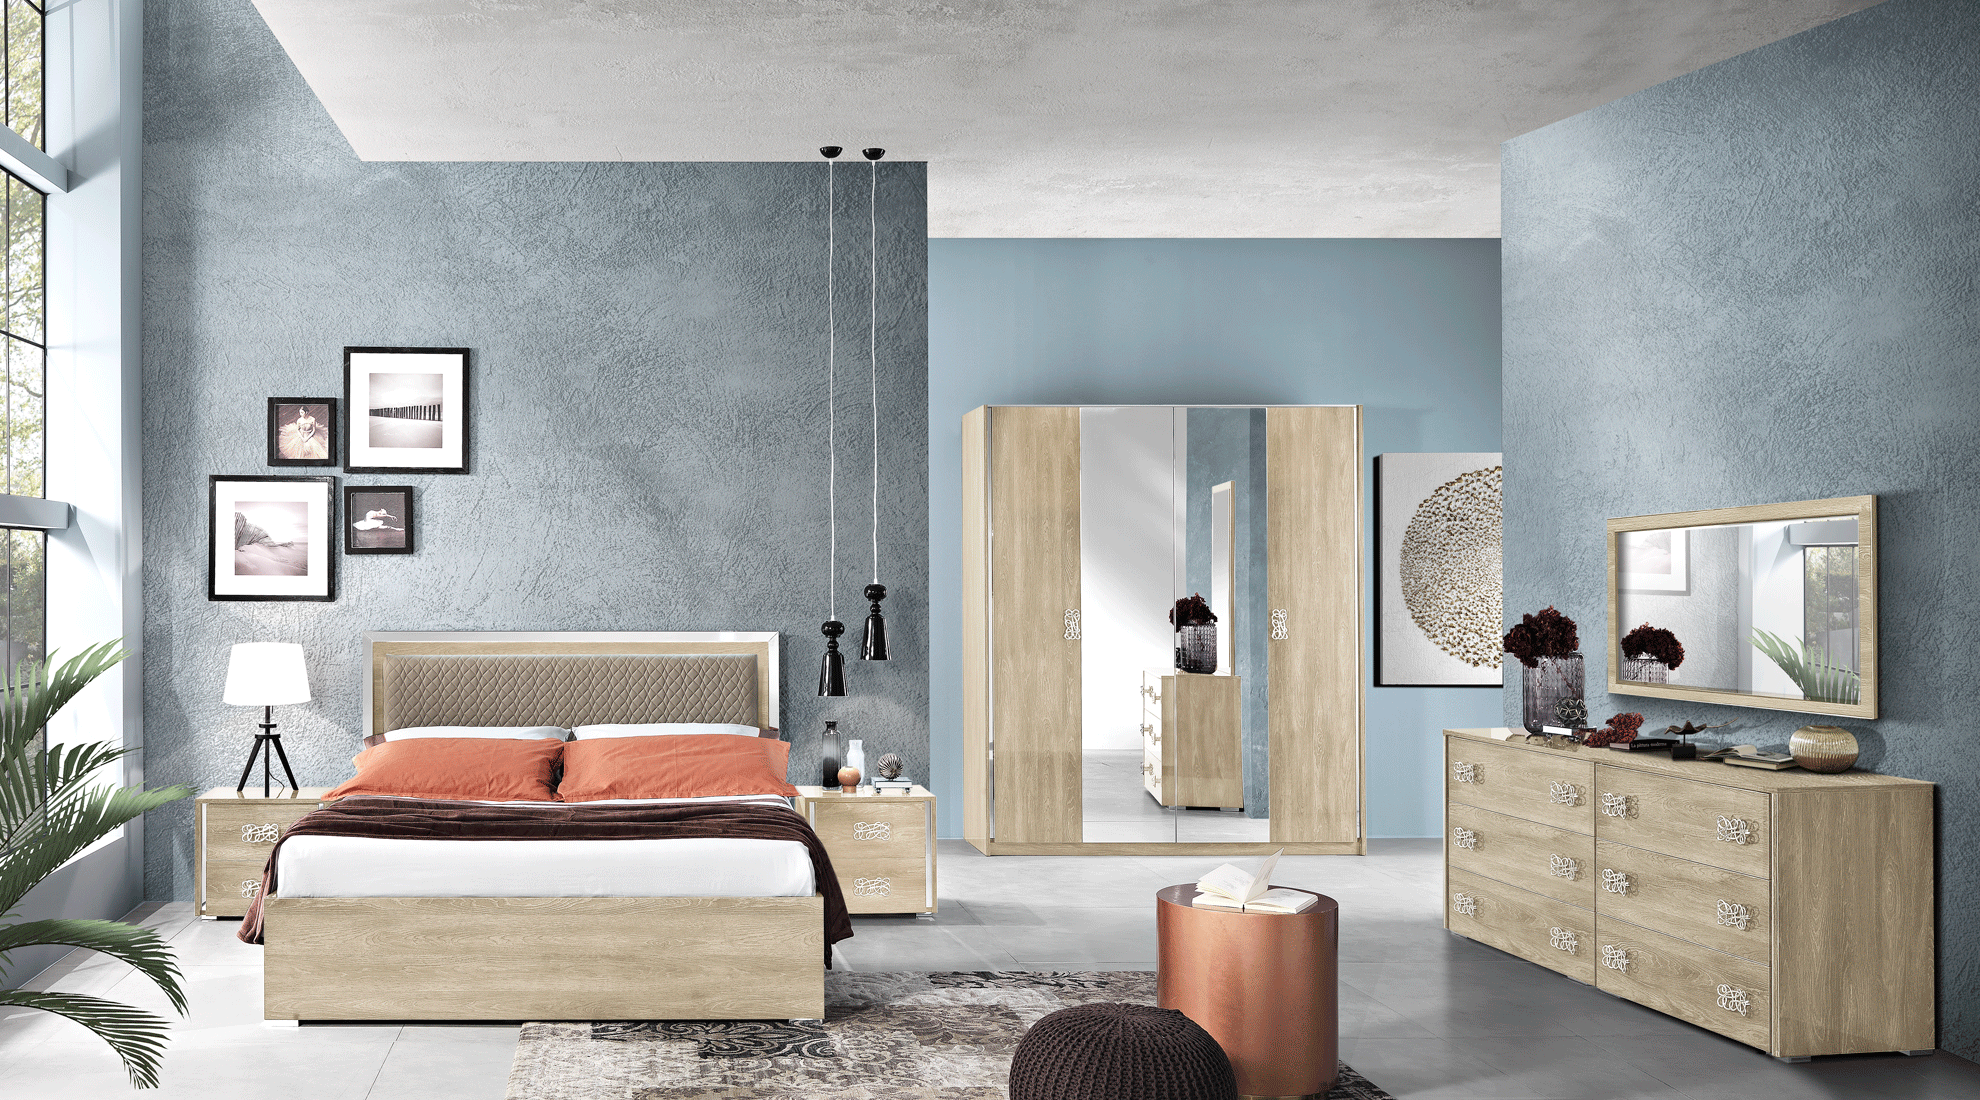 Bedroom Furniture Mirrors Dover Beige Additional Items